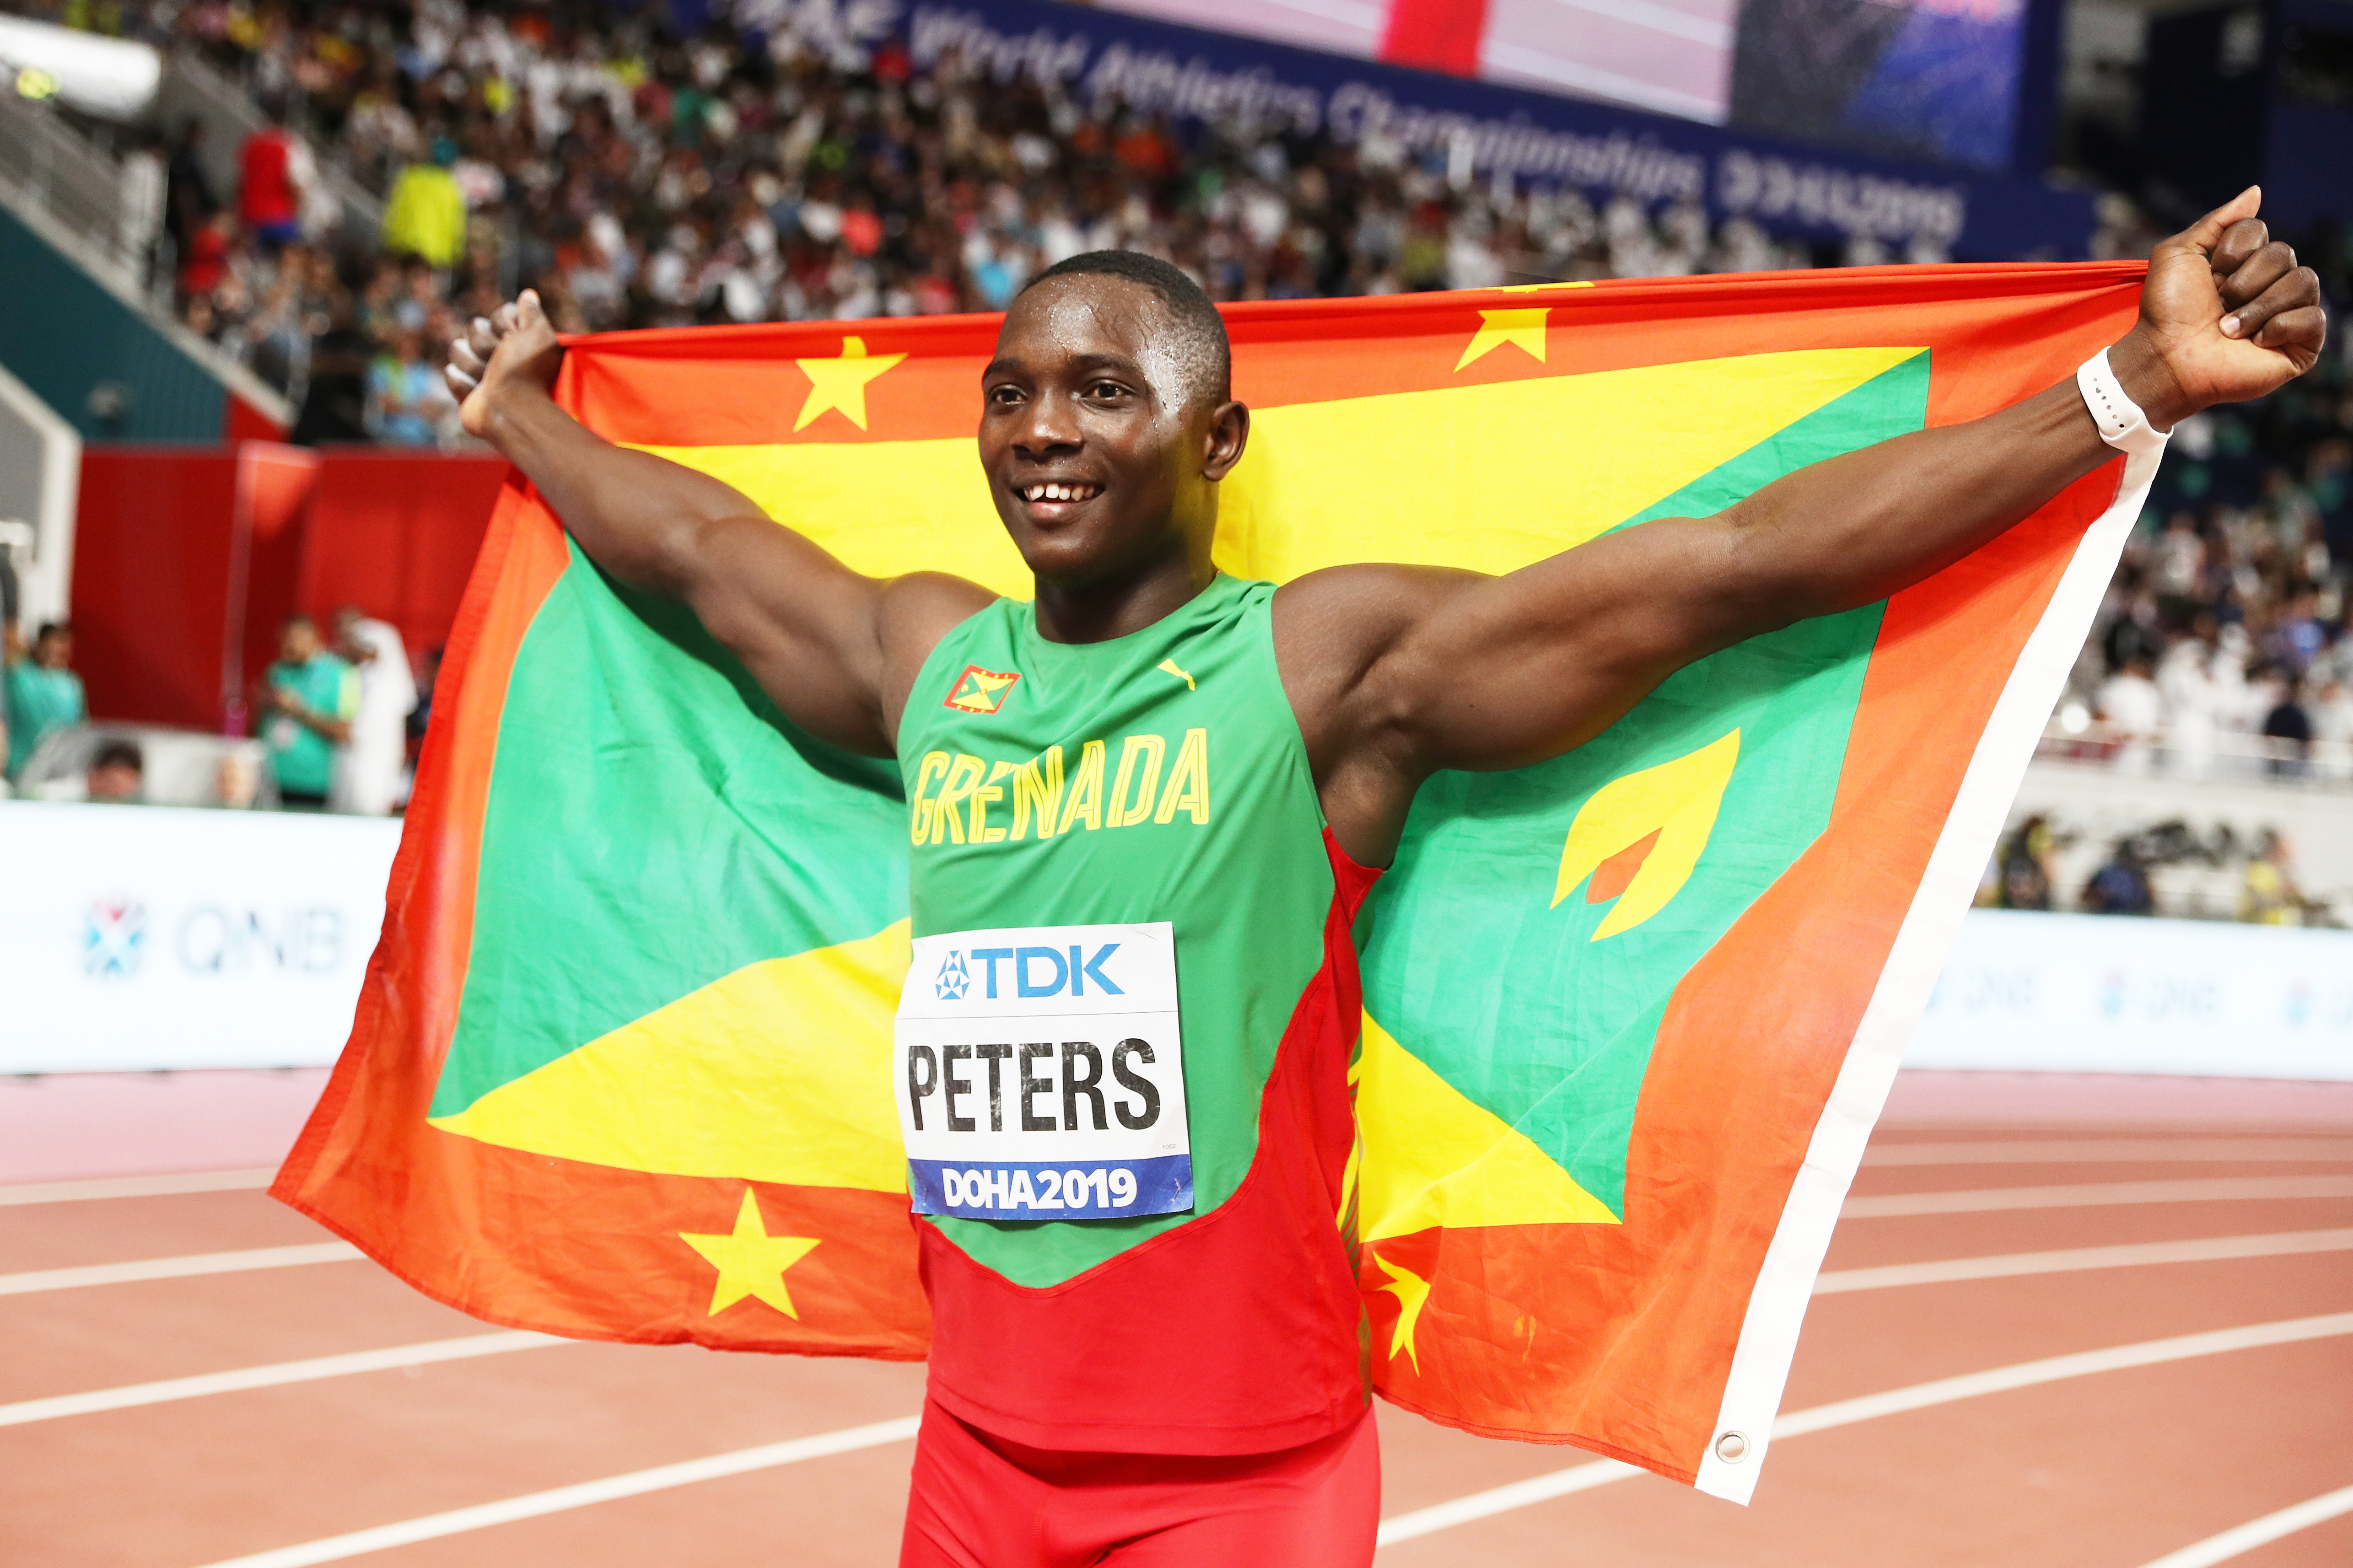 Anderson Peters spear into history #Doha2019